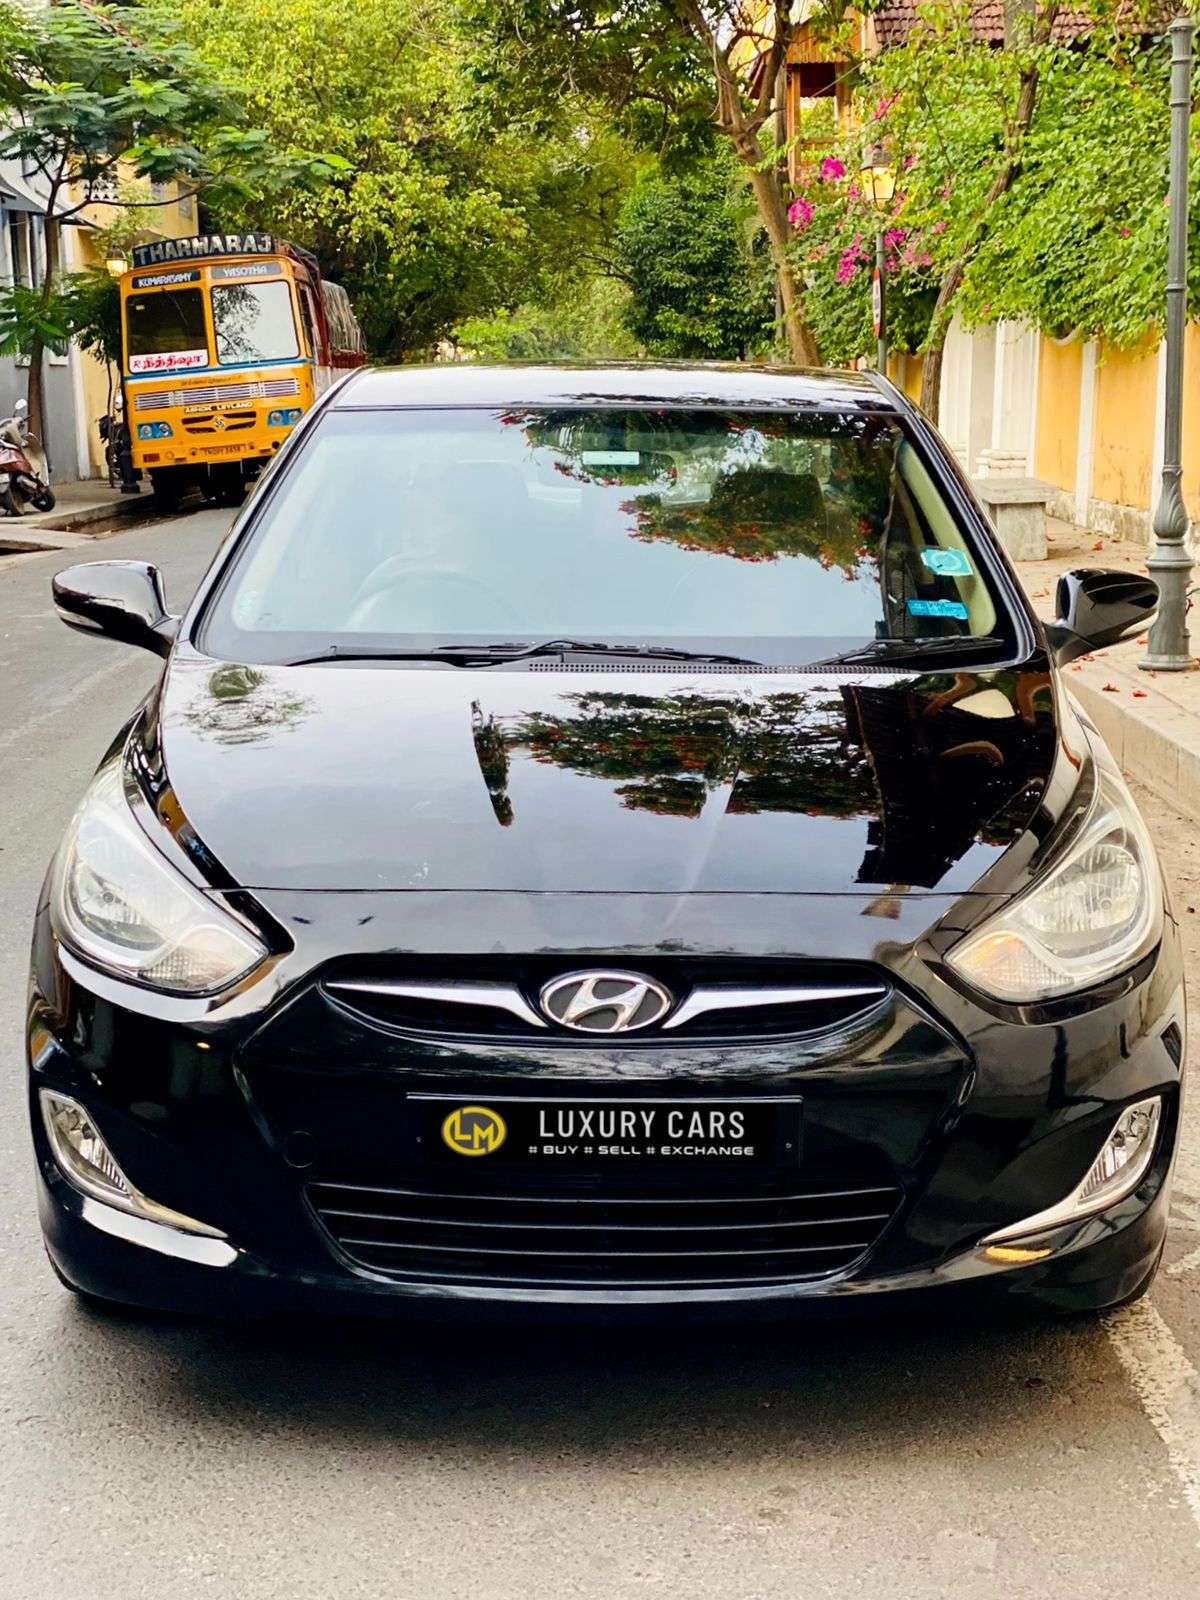 1514-for-sale-Hyundai-Verna-Fluidic-Diesel-First-Owner-2013-PY-registered-rs-485000